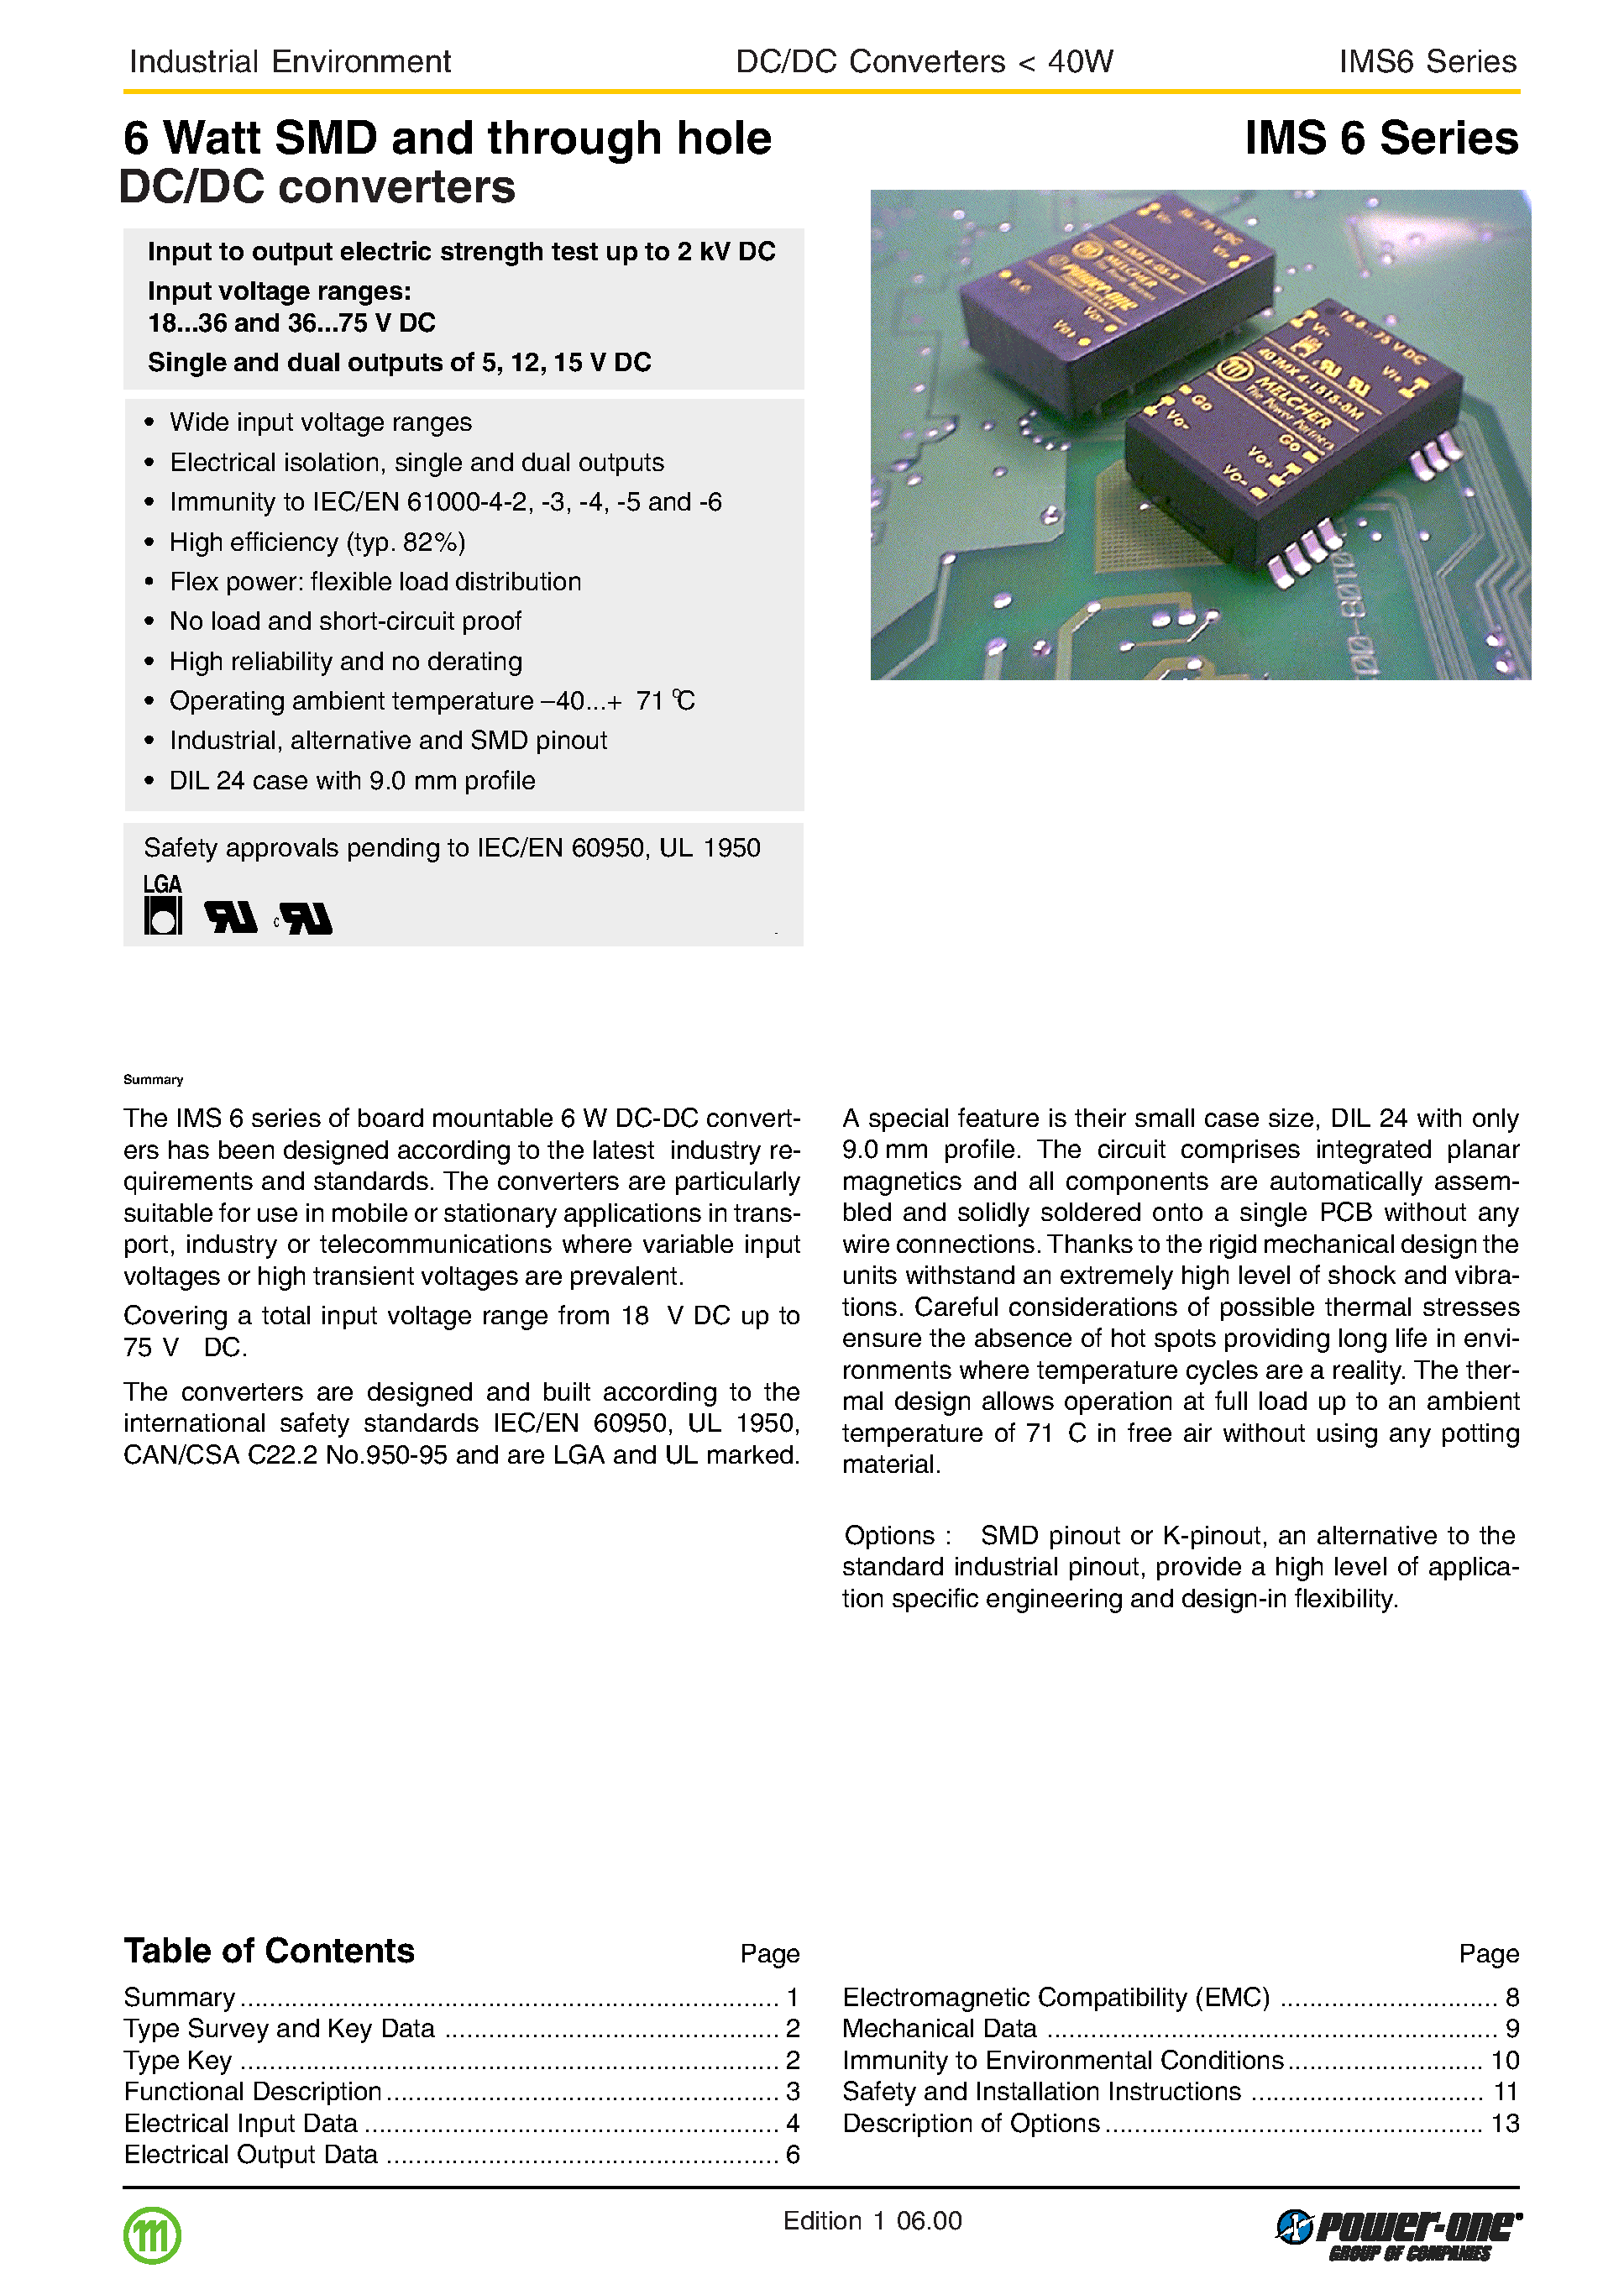 Datasheet 48IMS6-15-9 - 6 Watt SMD and through hole DC/DC converters page 1